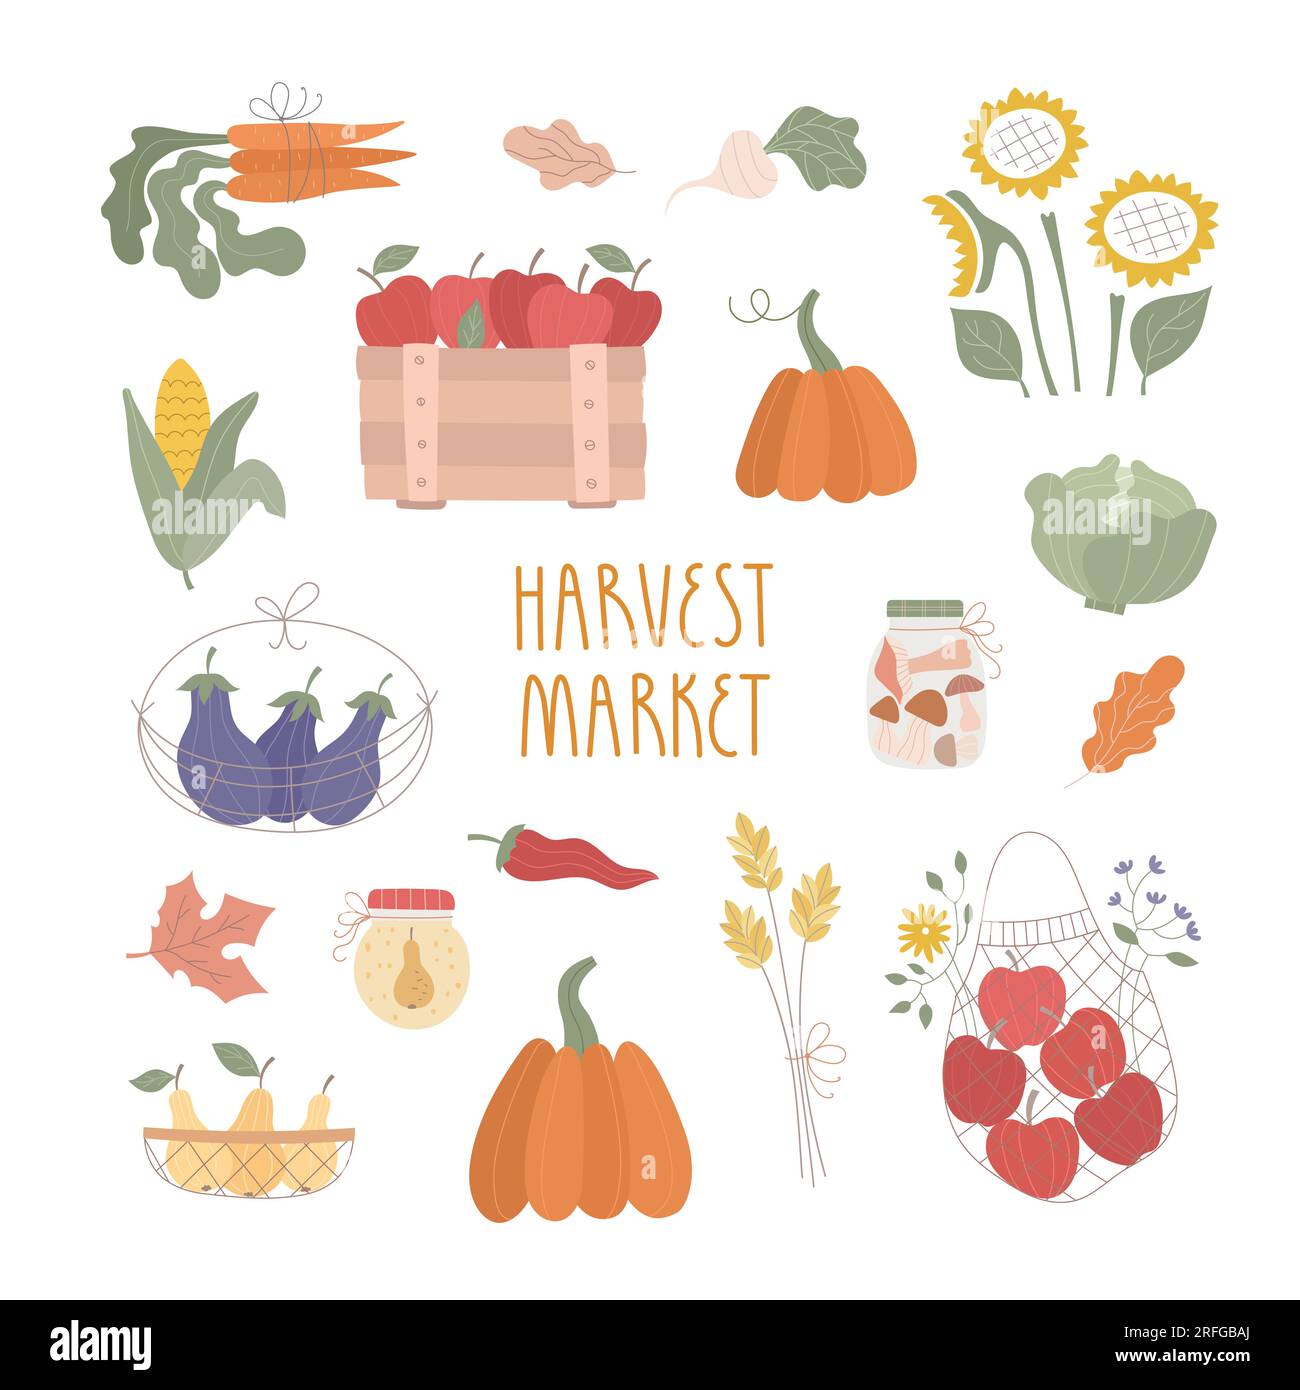 Set of fresh fruits, vegetables, baskets, farm products. Fall harvest market, cute vector illustrations, stickers. Stock Vector